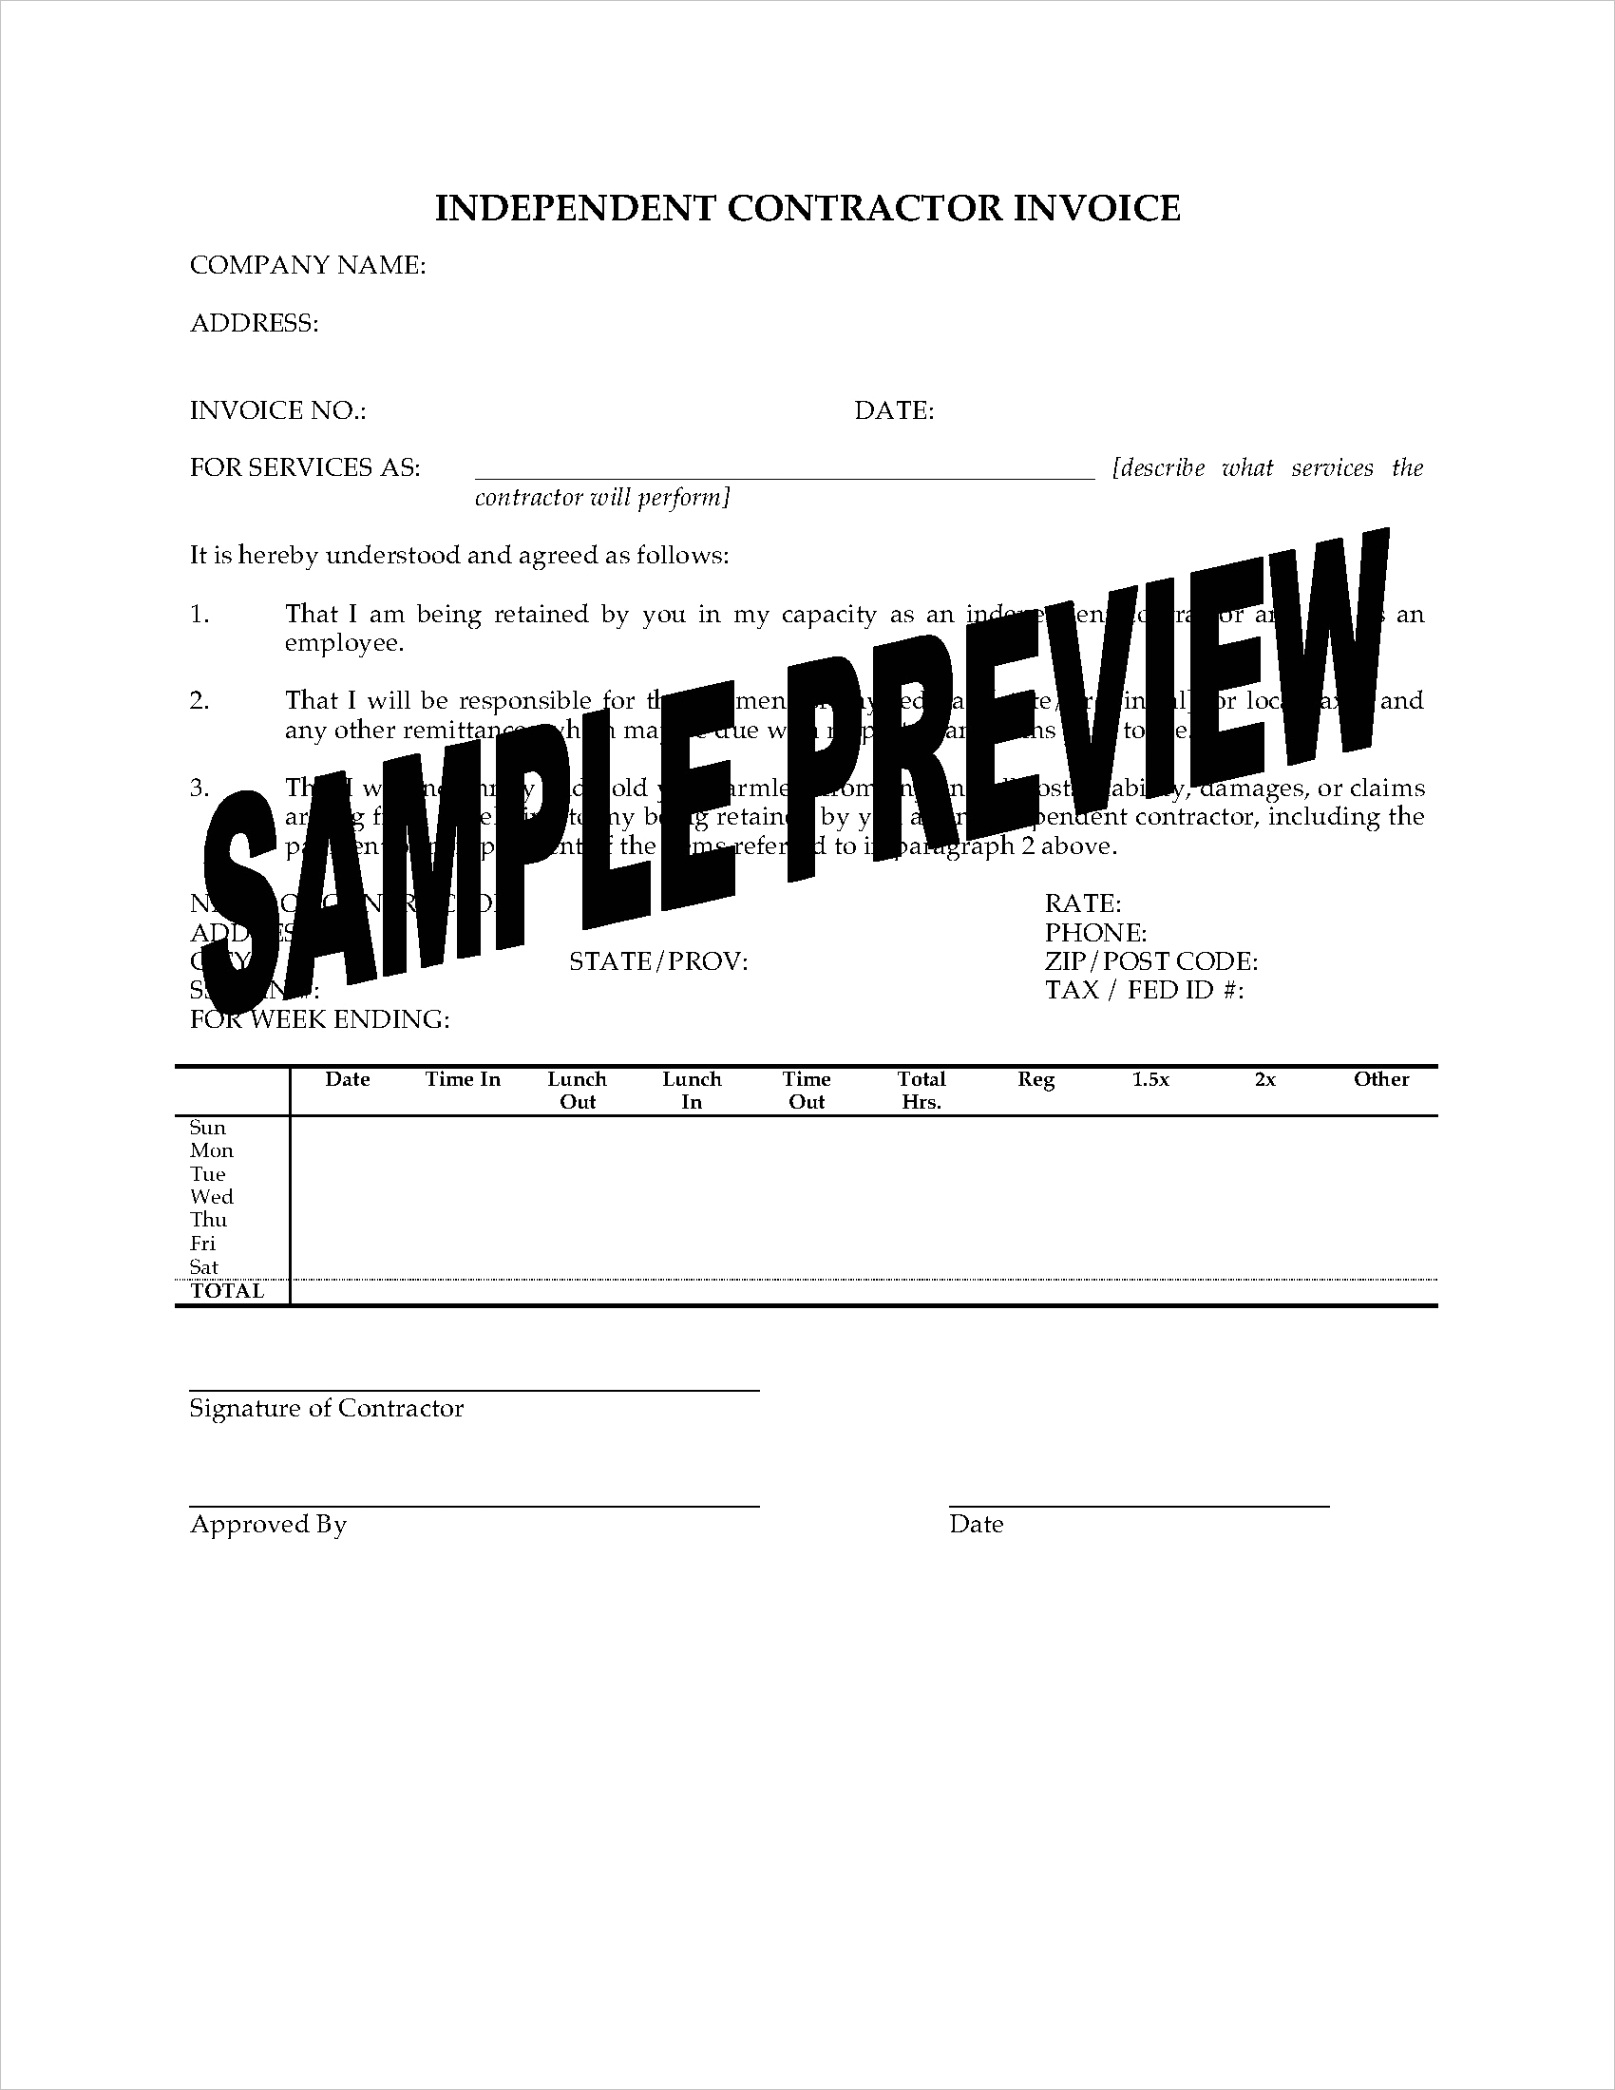 independent contractor invoice form